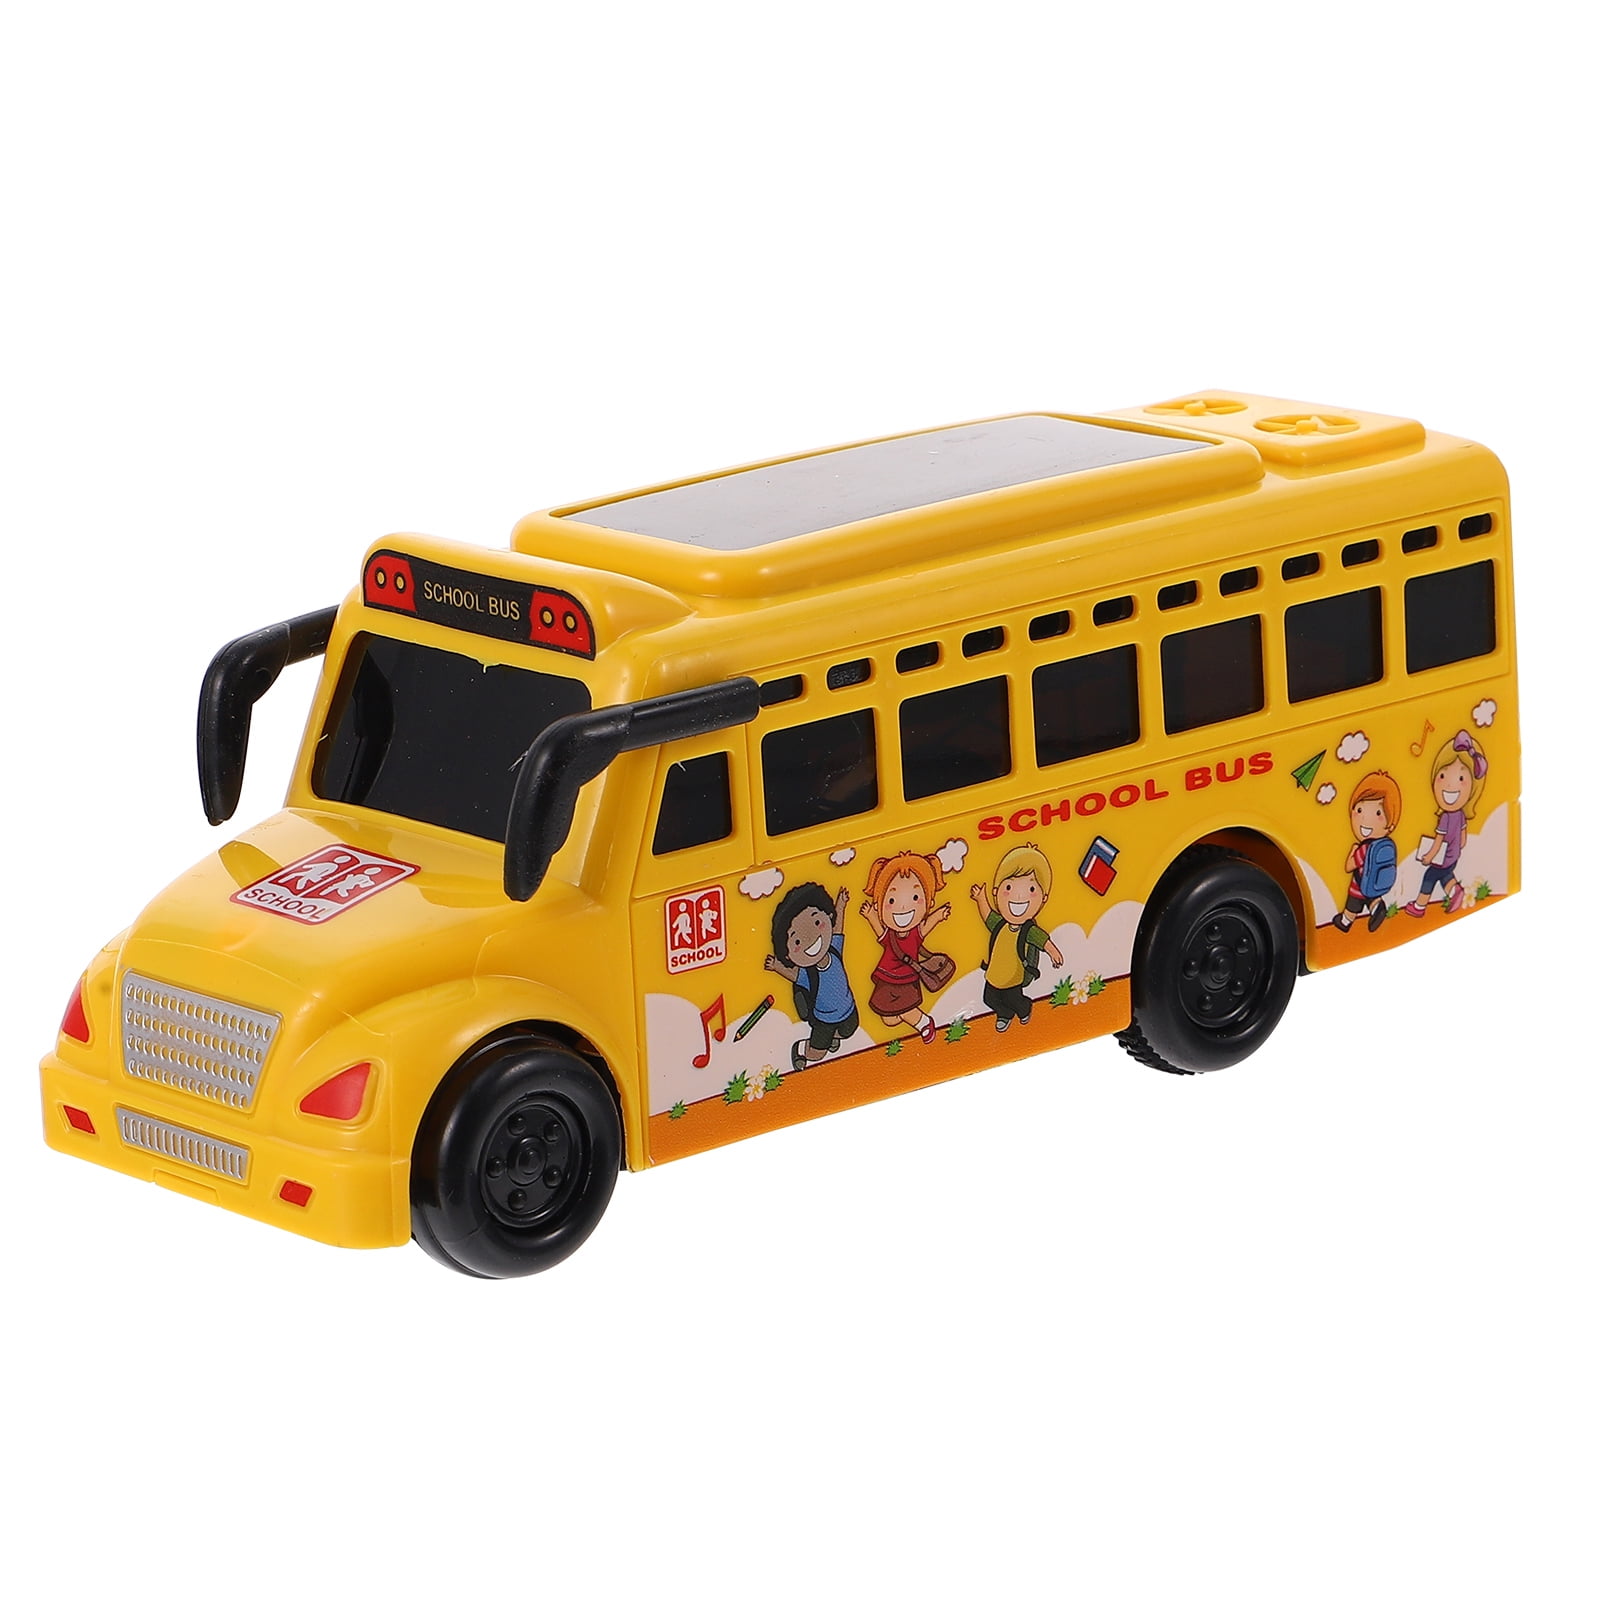 Baby Inertia Toys Creative Model Toy School Bus with Flashing Lights and Sounds for Baby Chirstmas Gift